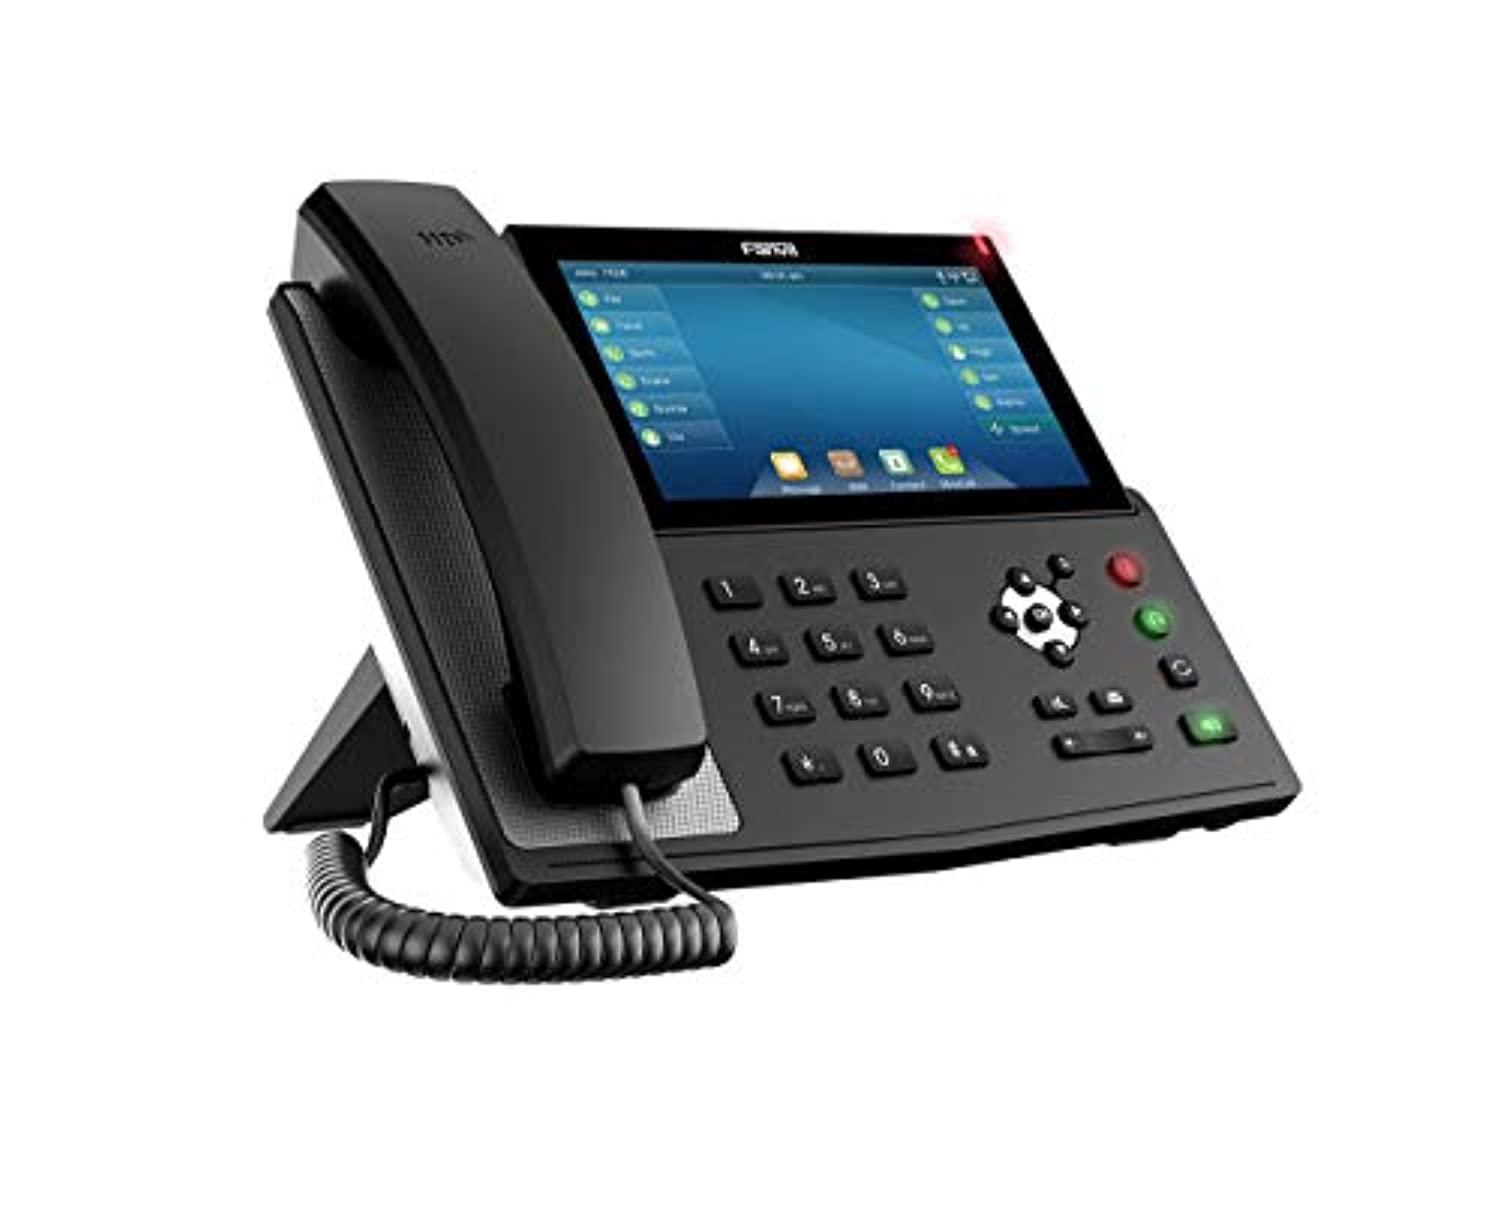 fanvil x7 enterprise voip phone, 7-inch color touch screen, 20 sip lines, power adapter not included (renewed)